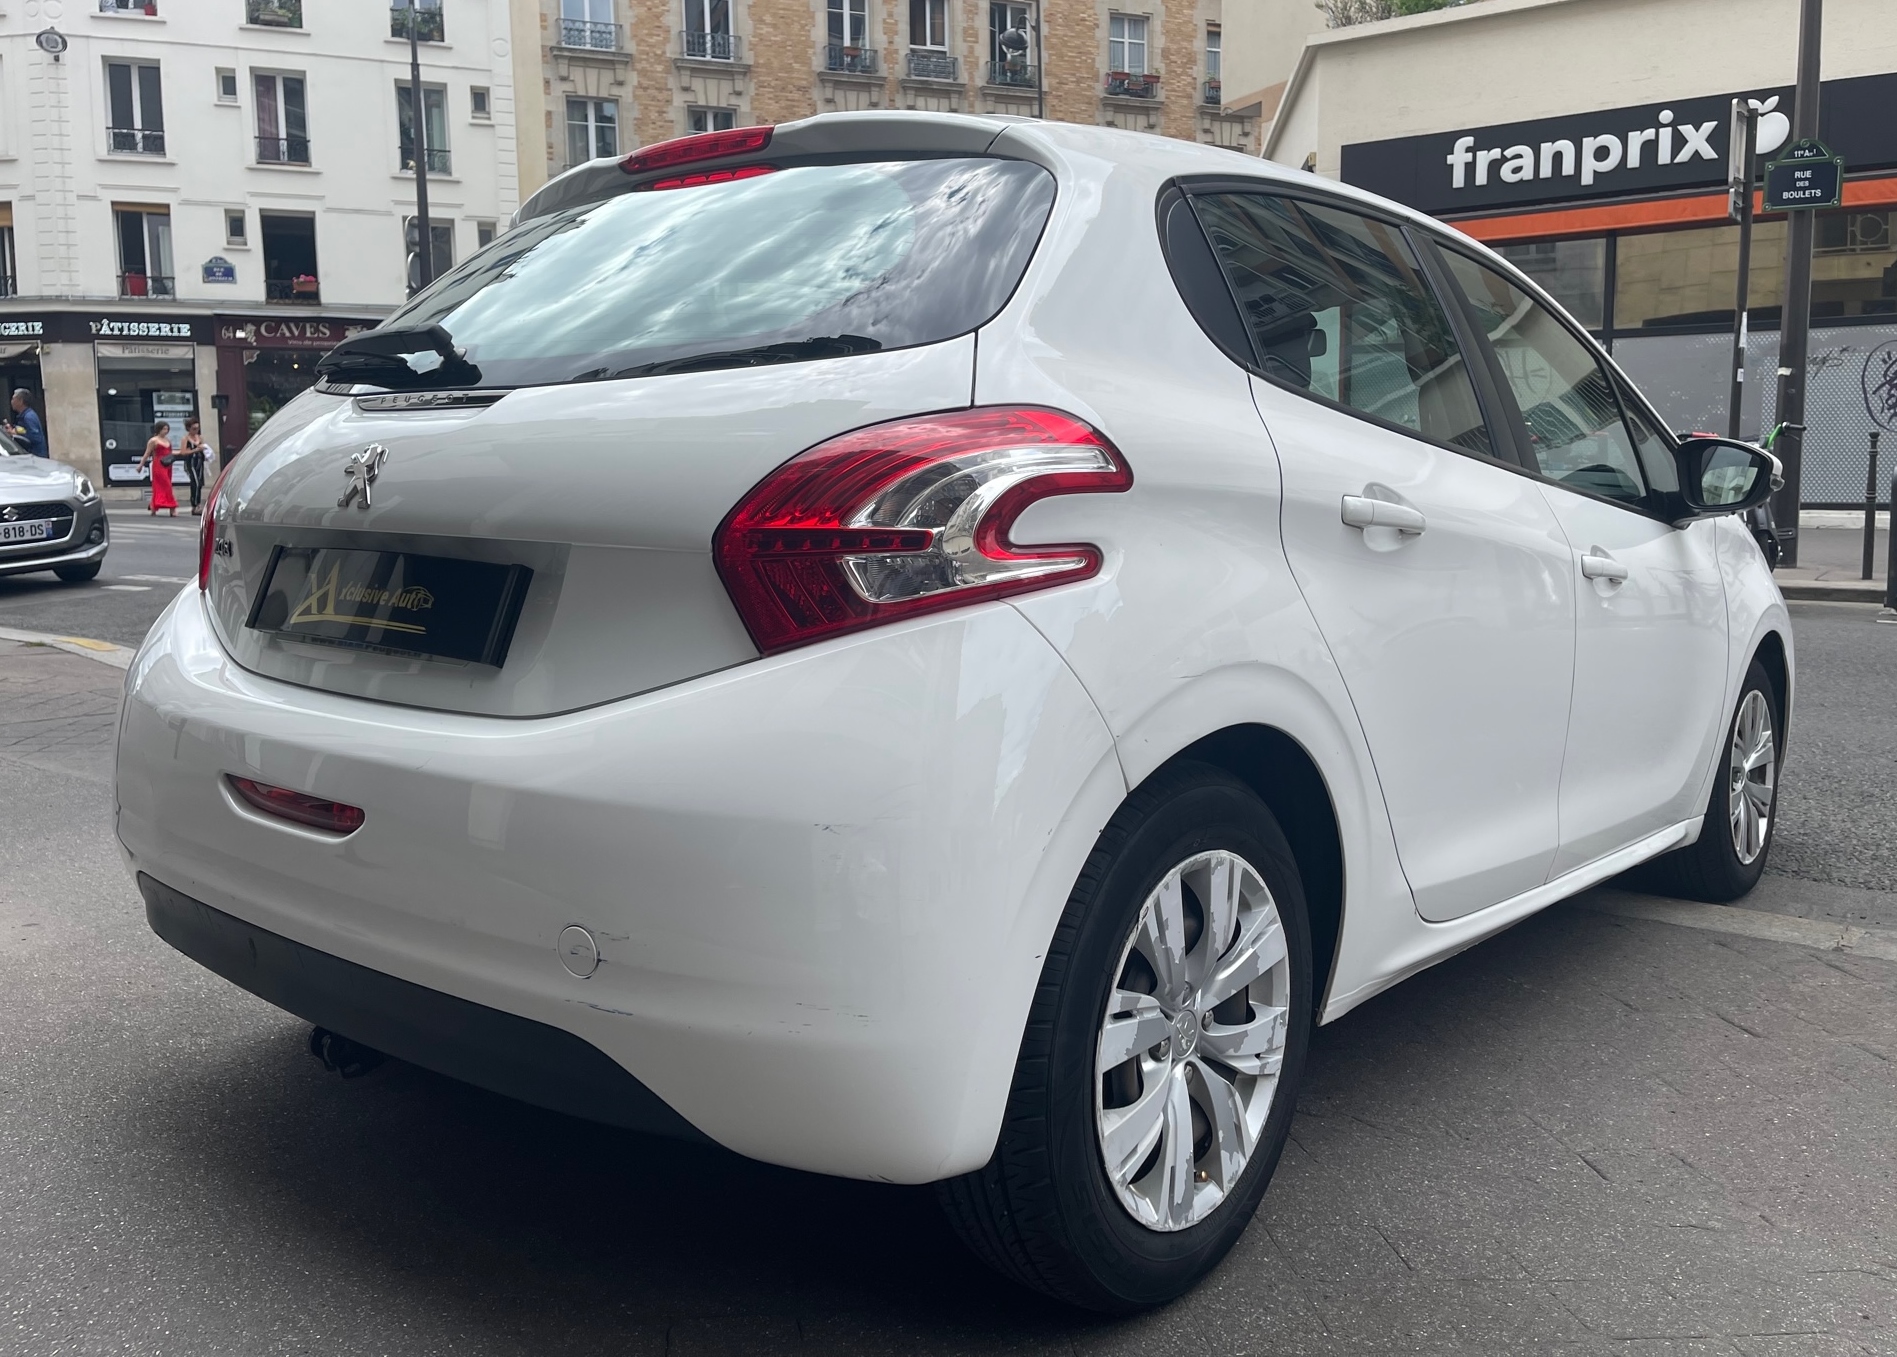 PEUGEOT 208 1.4 HDI 68 ACTIVE 2